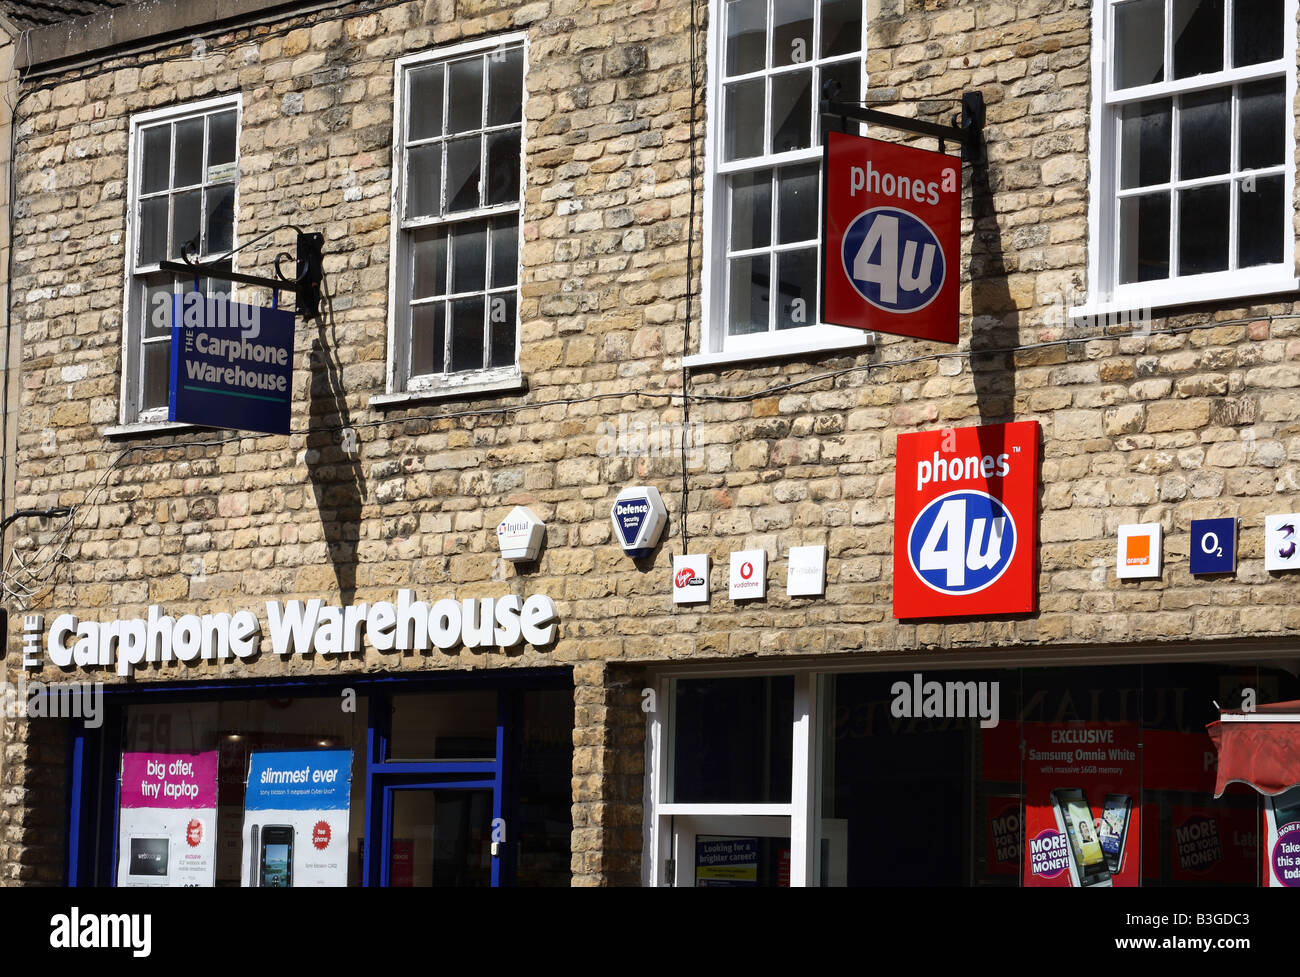 Carphone Warehouse and Phones 4U stores in Stamford, Lincolnshire, England, U.K. Stock Photo